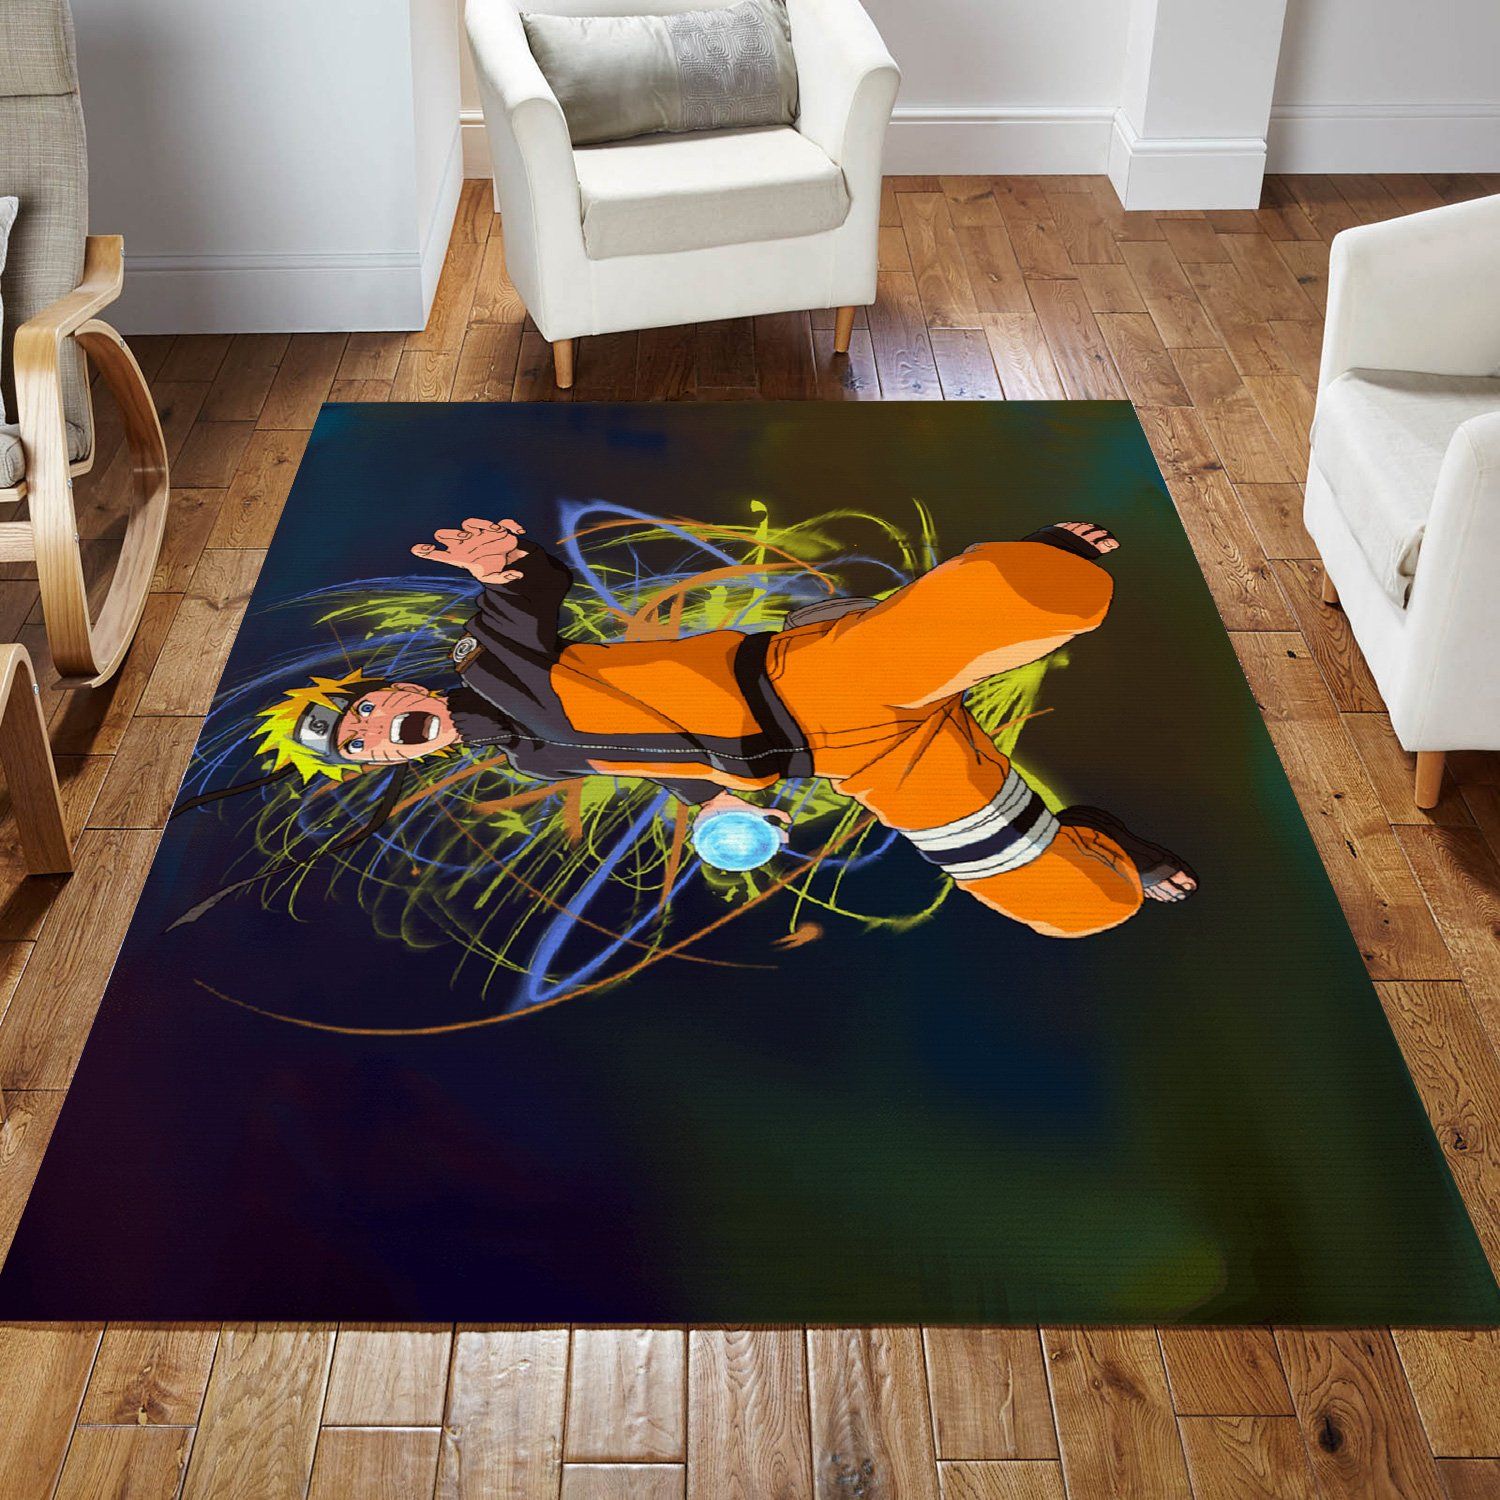 Anime Rug Game Area Rugs for Boys Bedroom NonSlip India  Ubuy